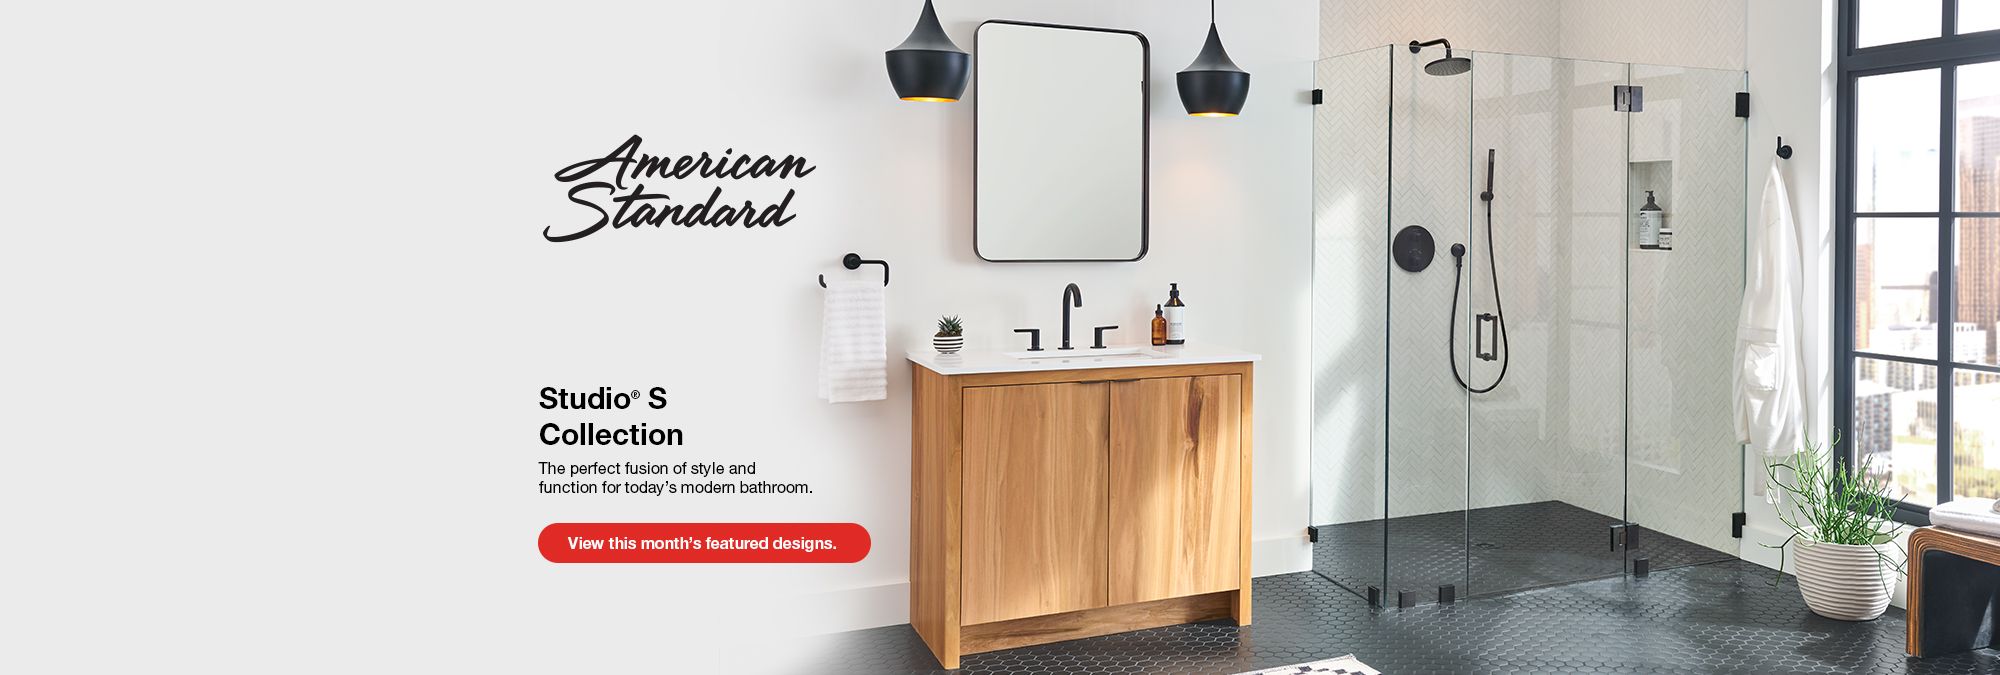 American Standard Studio S collection at TAPS